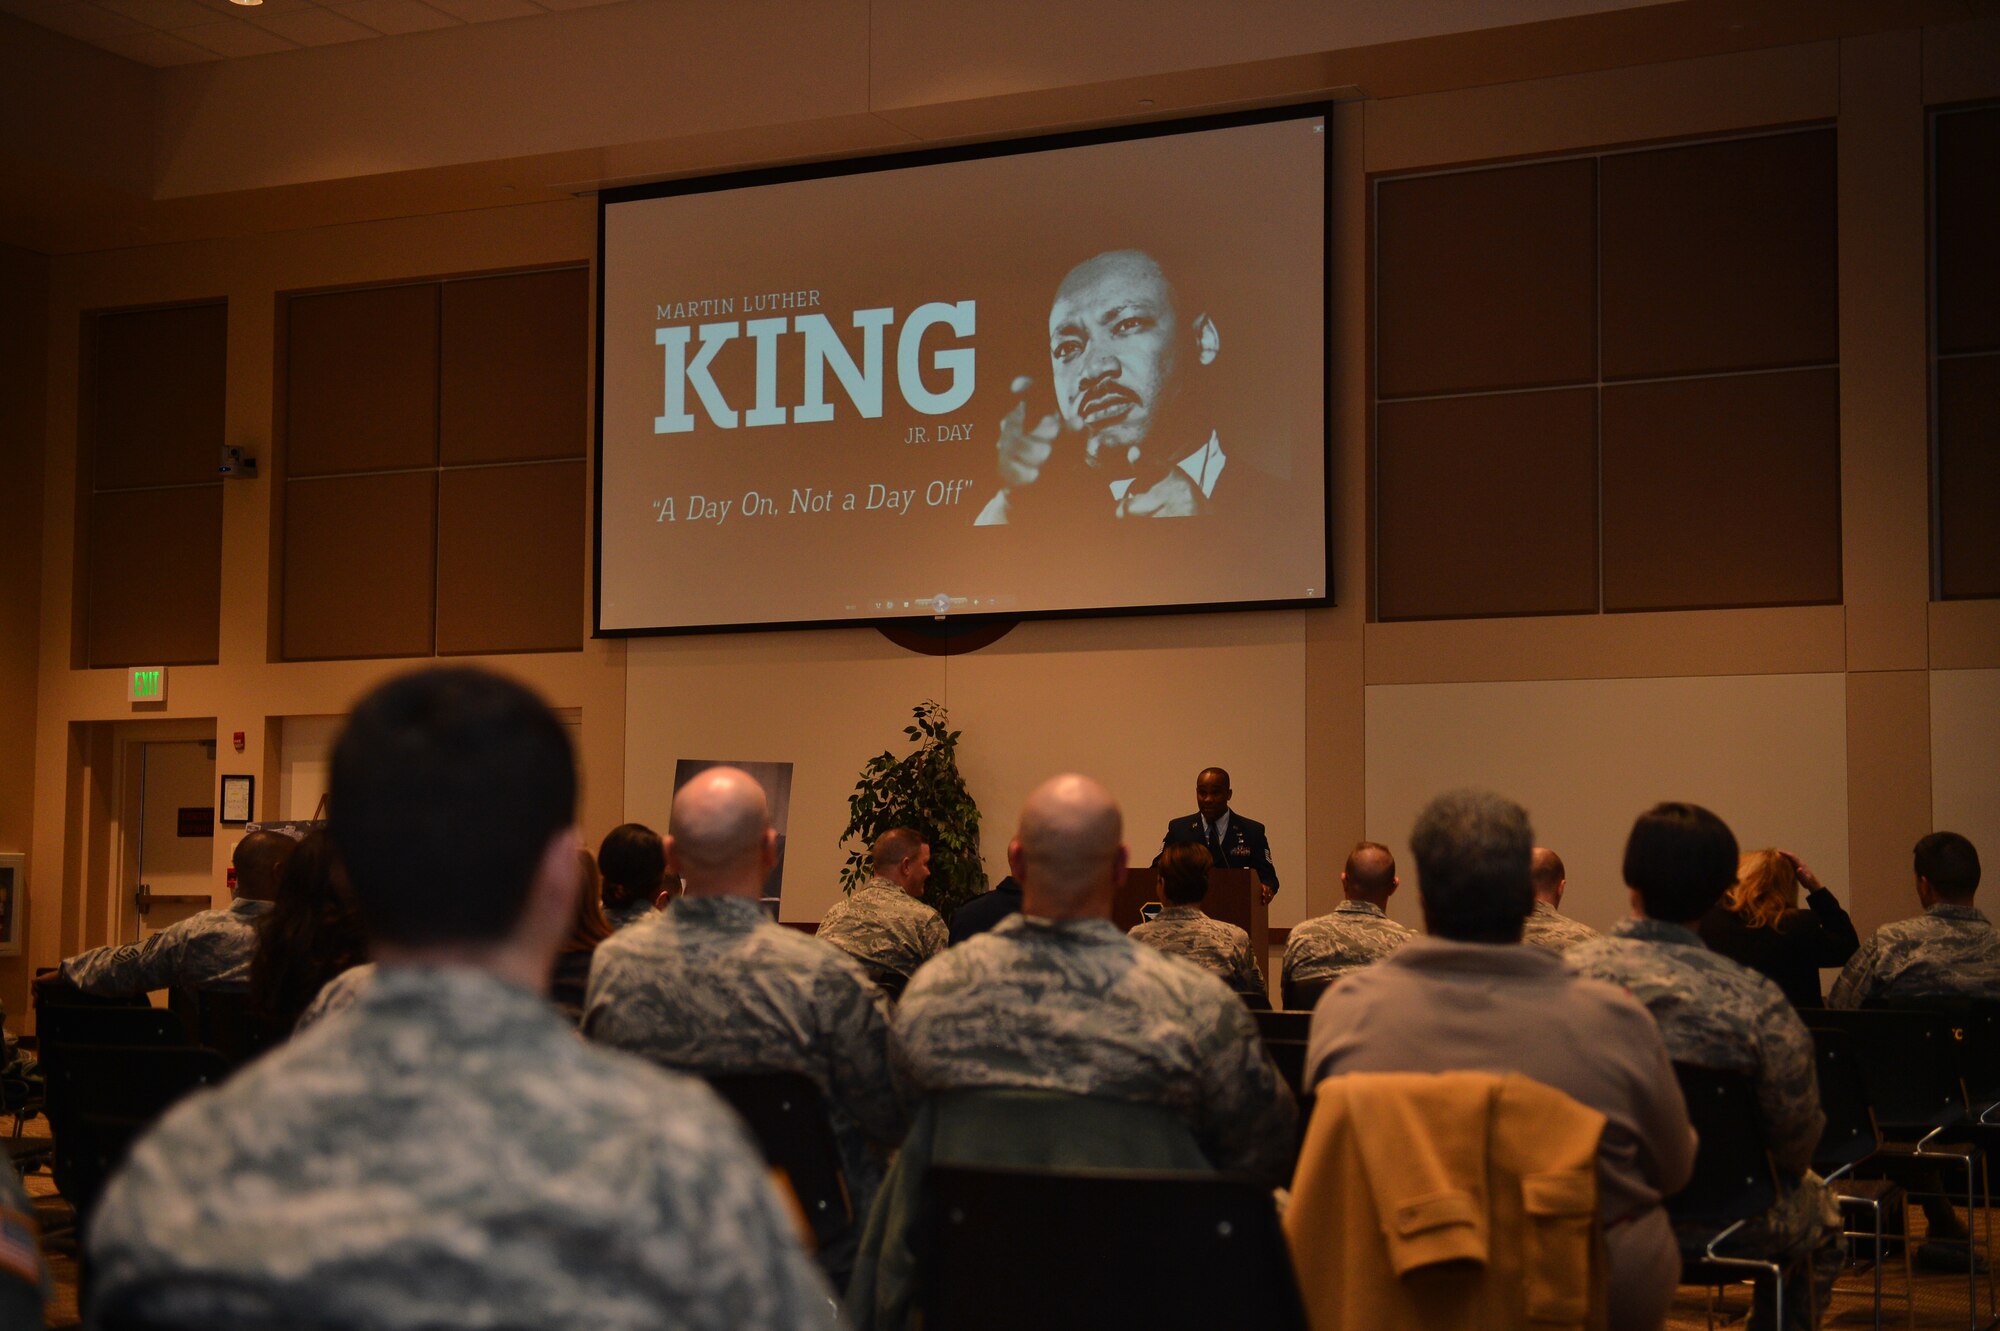 Tech. Sgt. Joel Johnson, Air Reserve Personnel Center education services specialist, speaks during the Martin Luther King, Jr. Day ceremony at the Leadership Development Center Jan. 11, 2016, on Buckley Air Force Base, Colo. The ceremony featured readings of Dr. King’s speeches, videos, and southern style food. (U.S. Air Force photo by Staff Sgt. Darren Scott/Released)